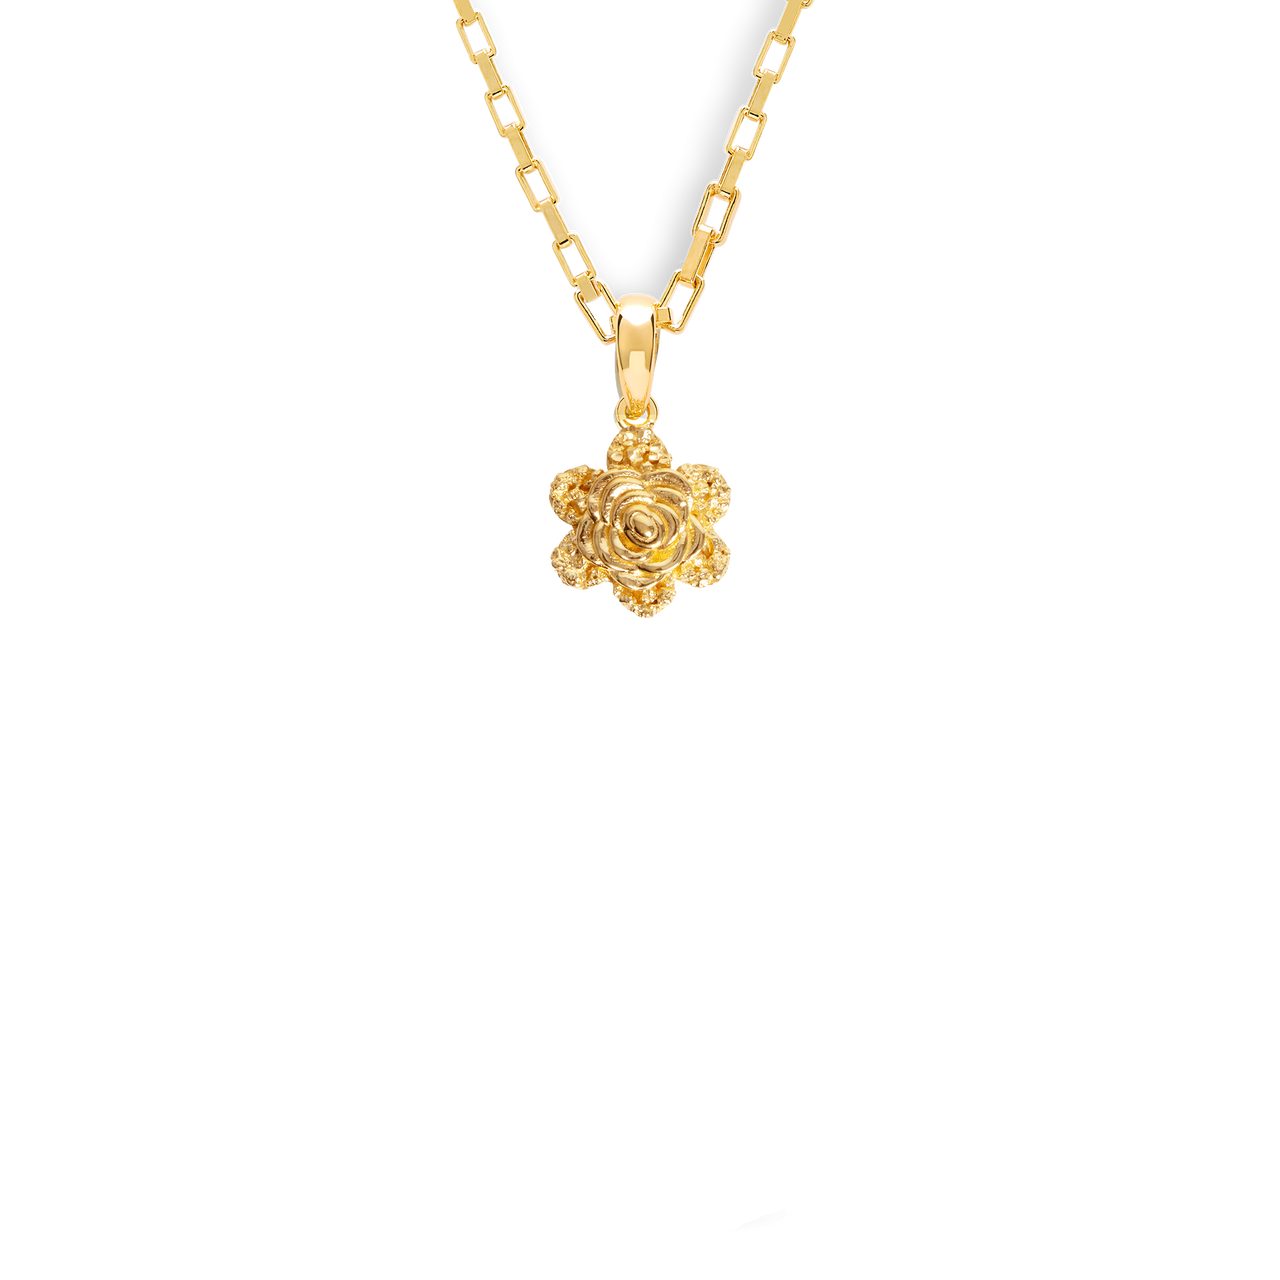 VC061 SMALL ROSE PENDANT NECKLACE